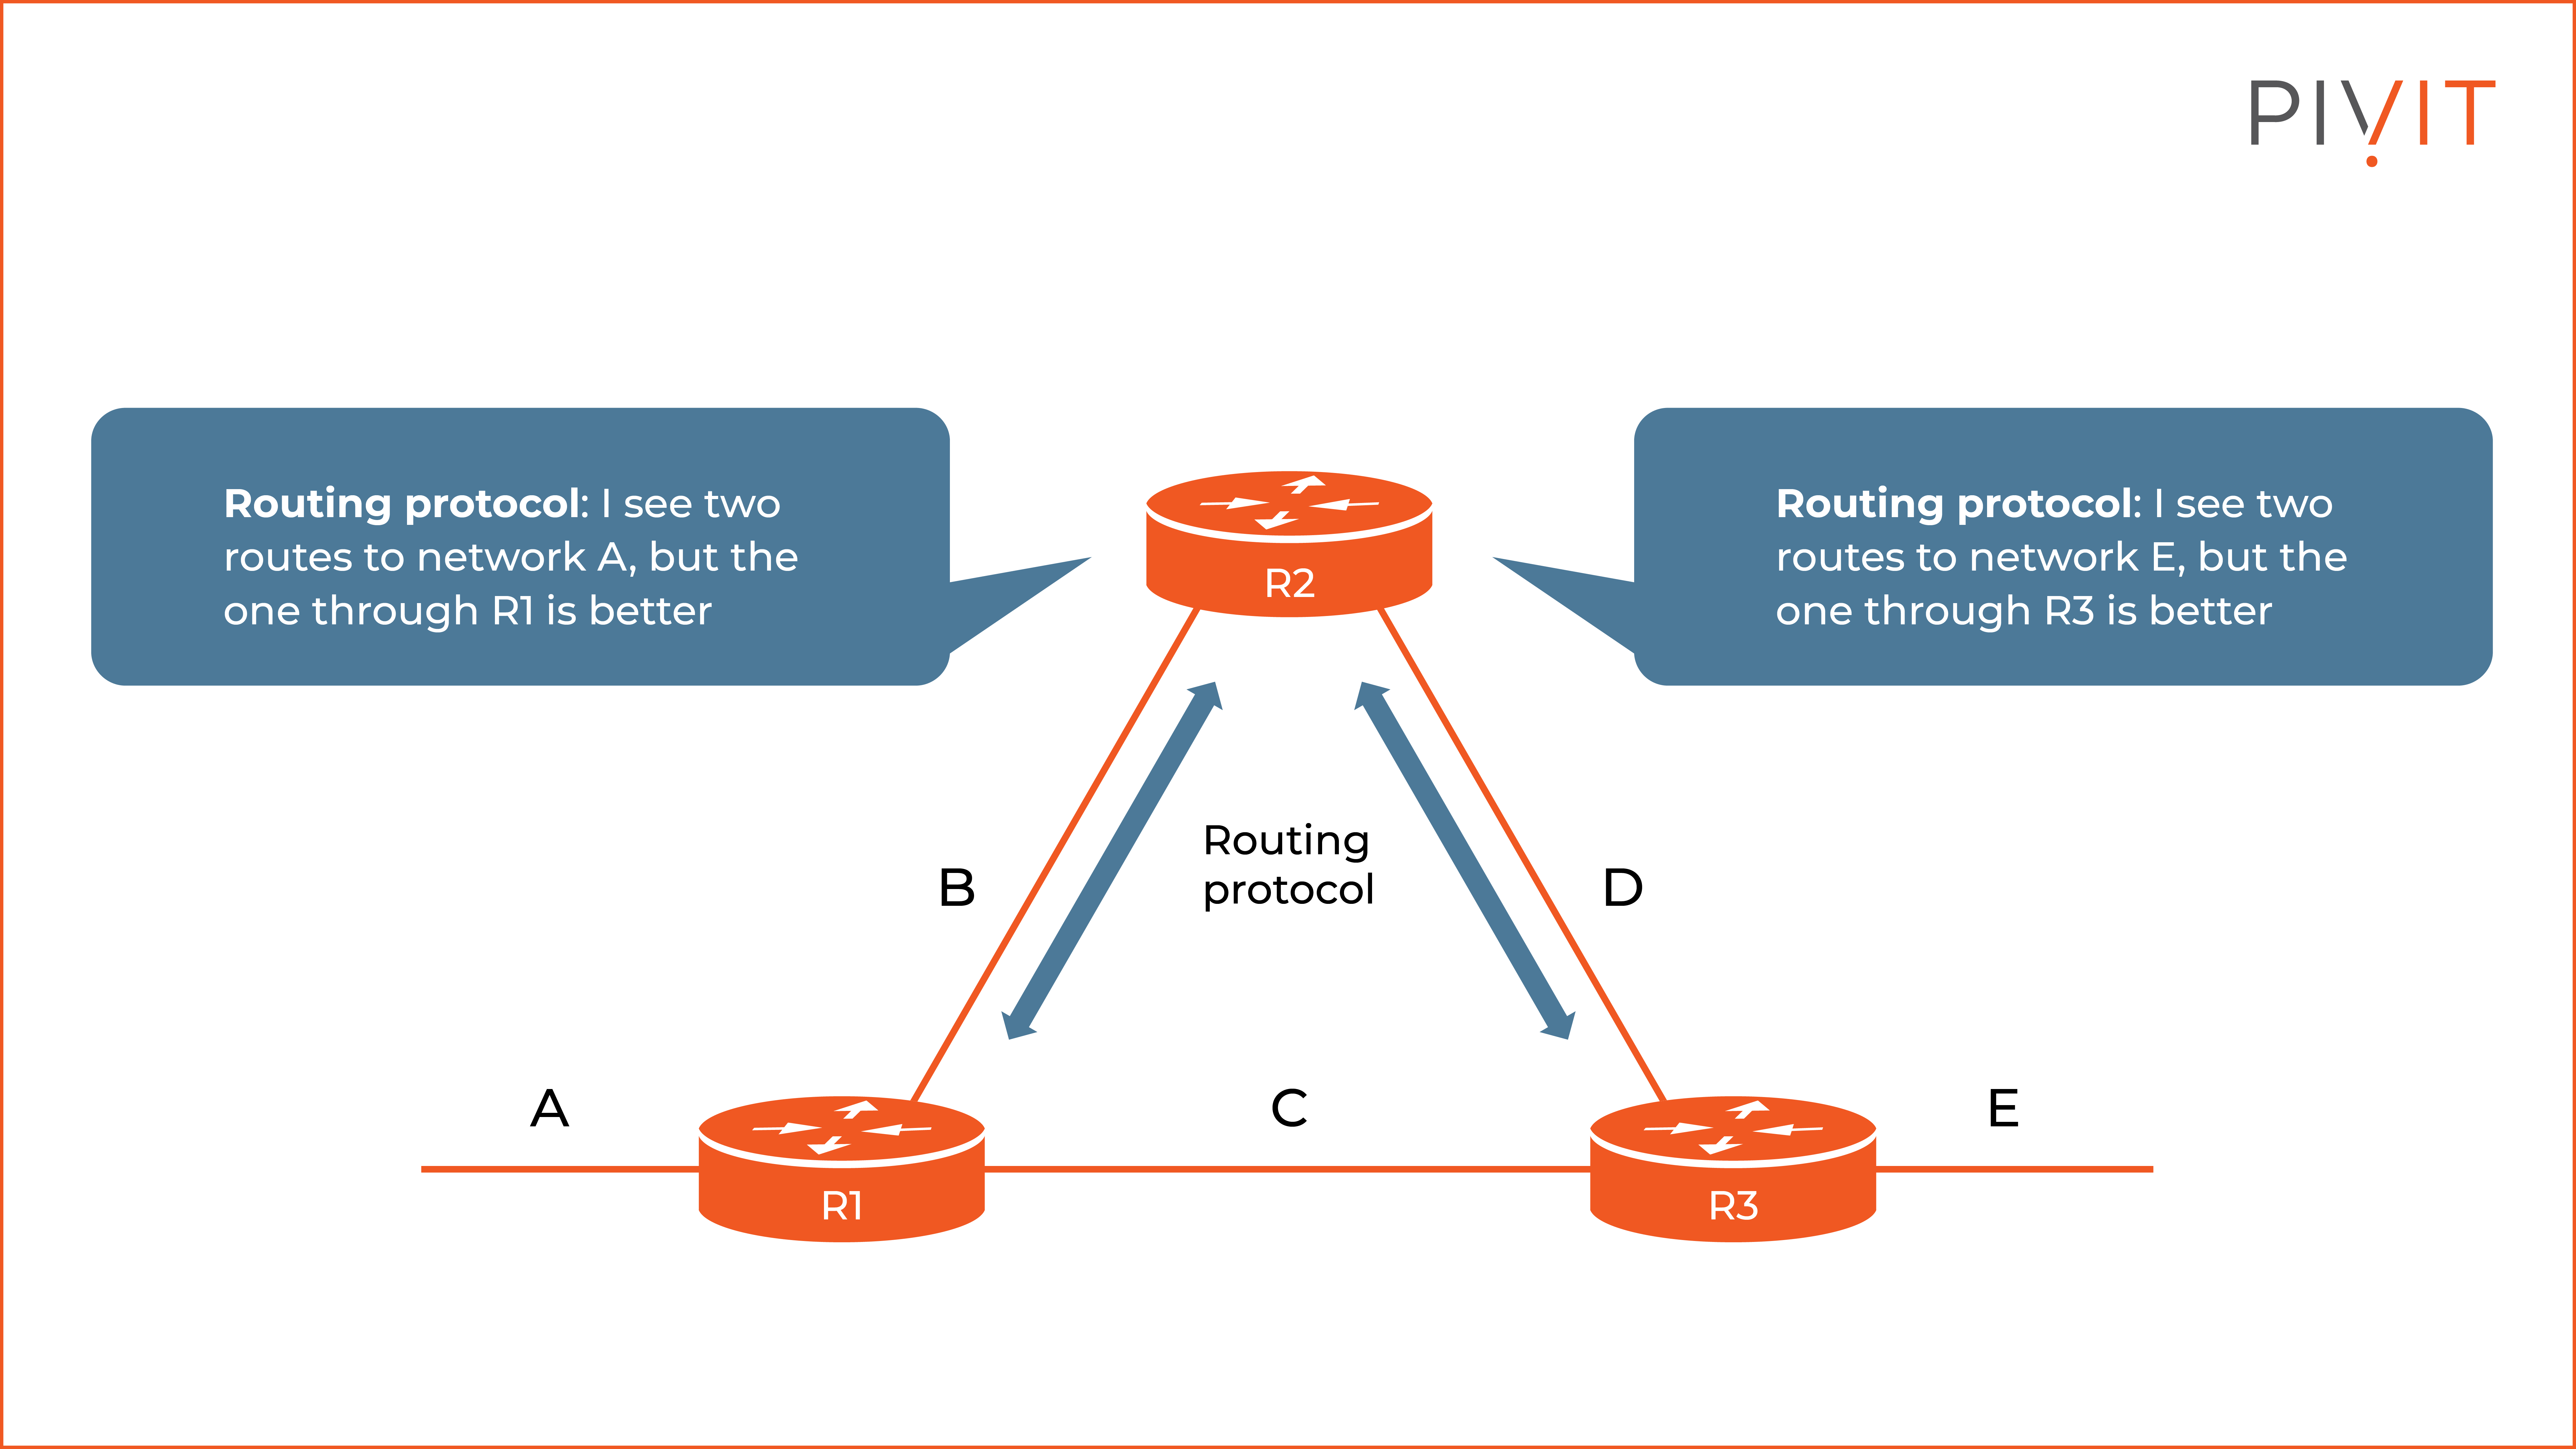 advantages and disadvantages of dynamic routing